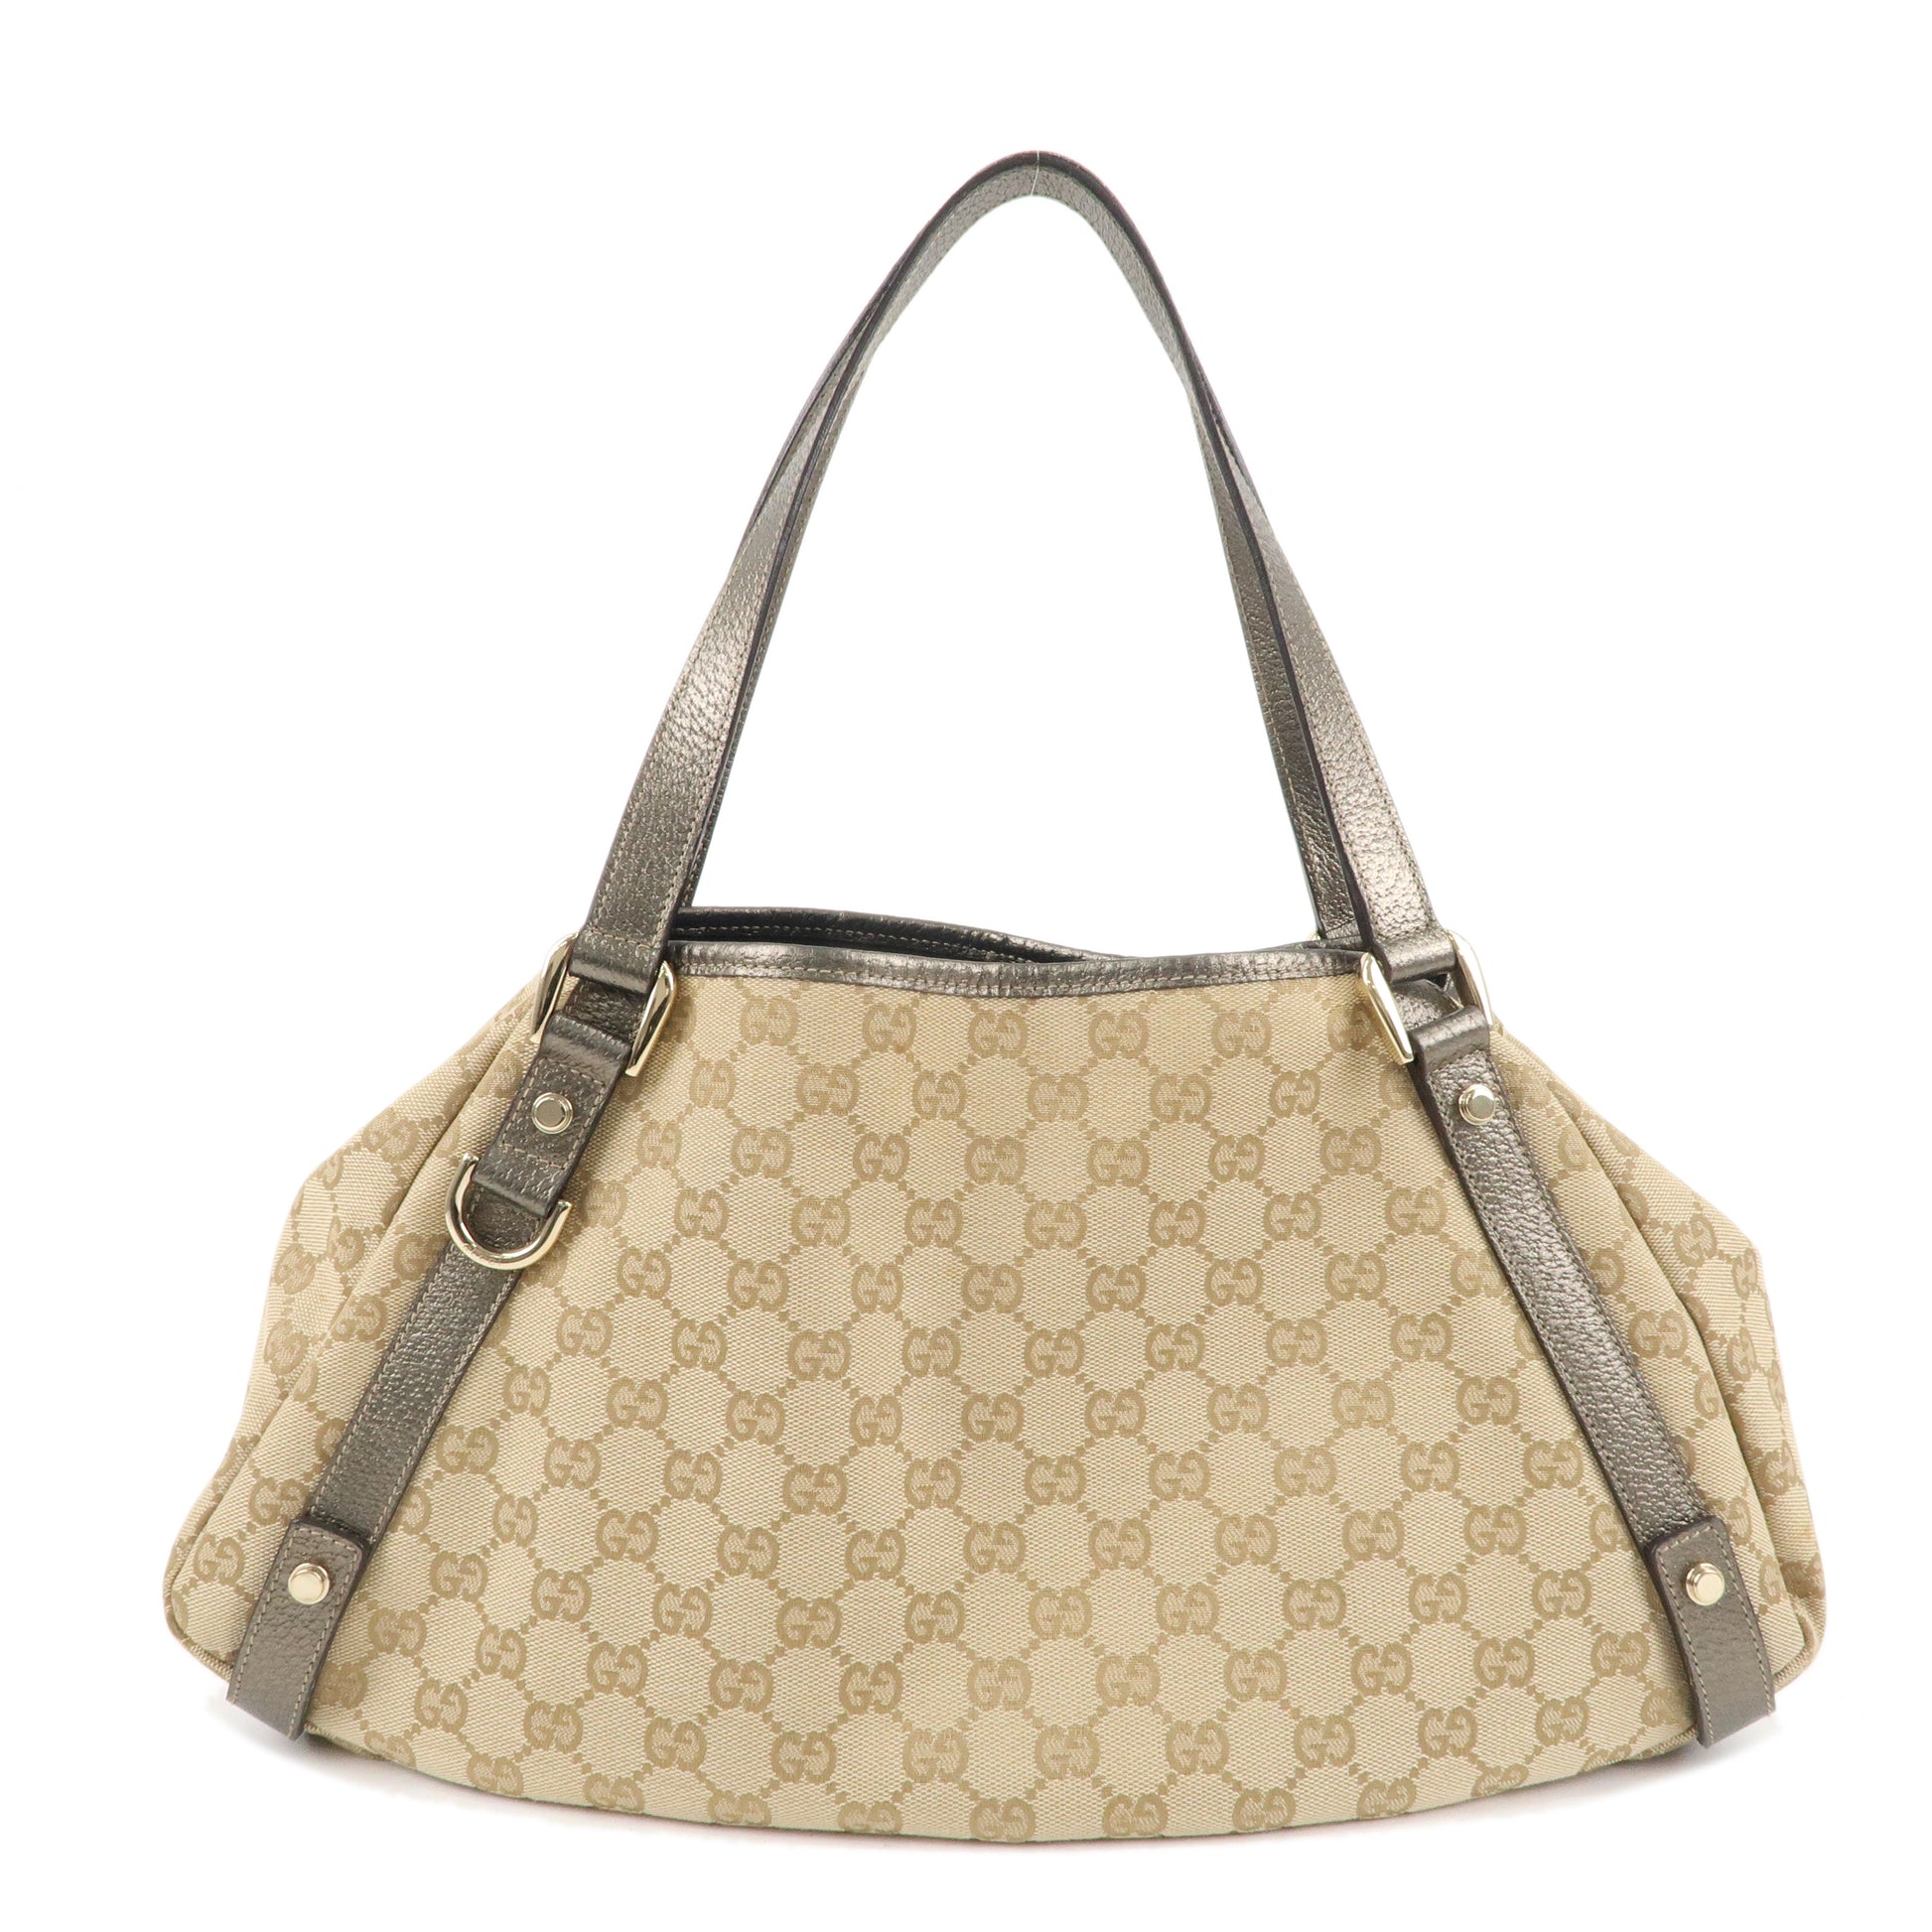 GUCCI-Abbey-GG-Canvas-Leather-Tote-Hand-Bag-Beige-130736